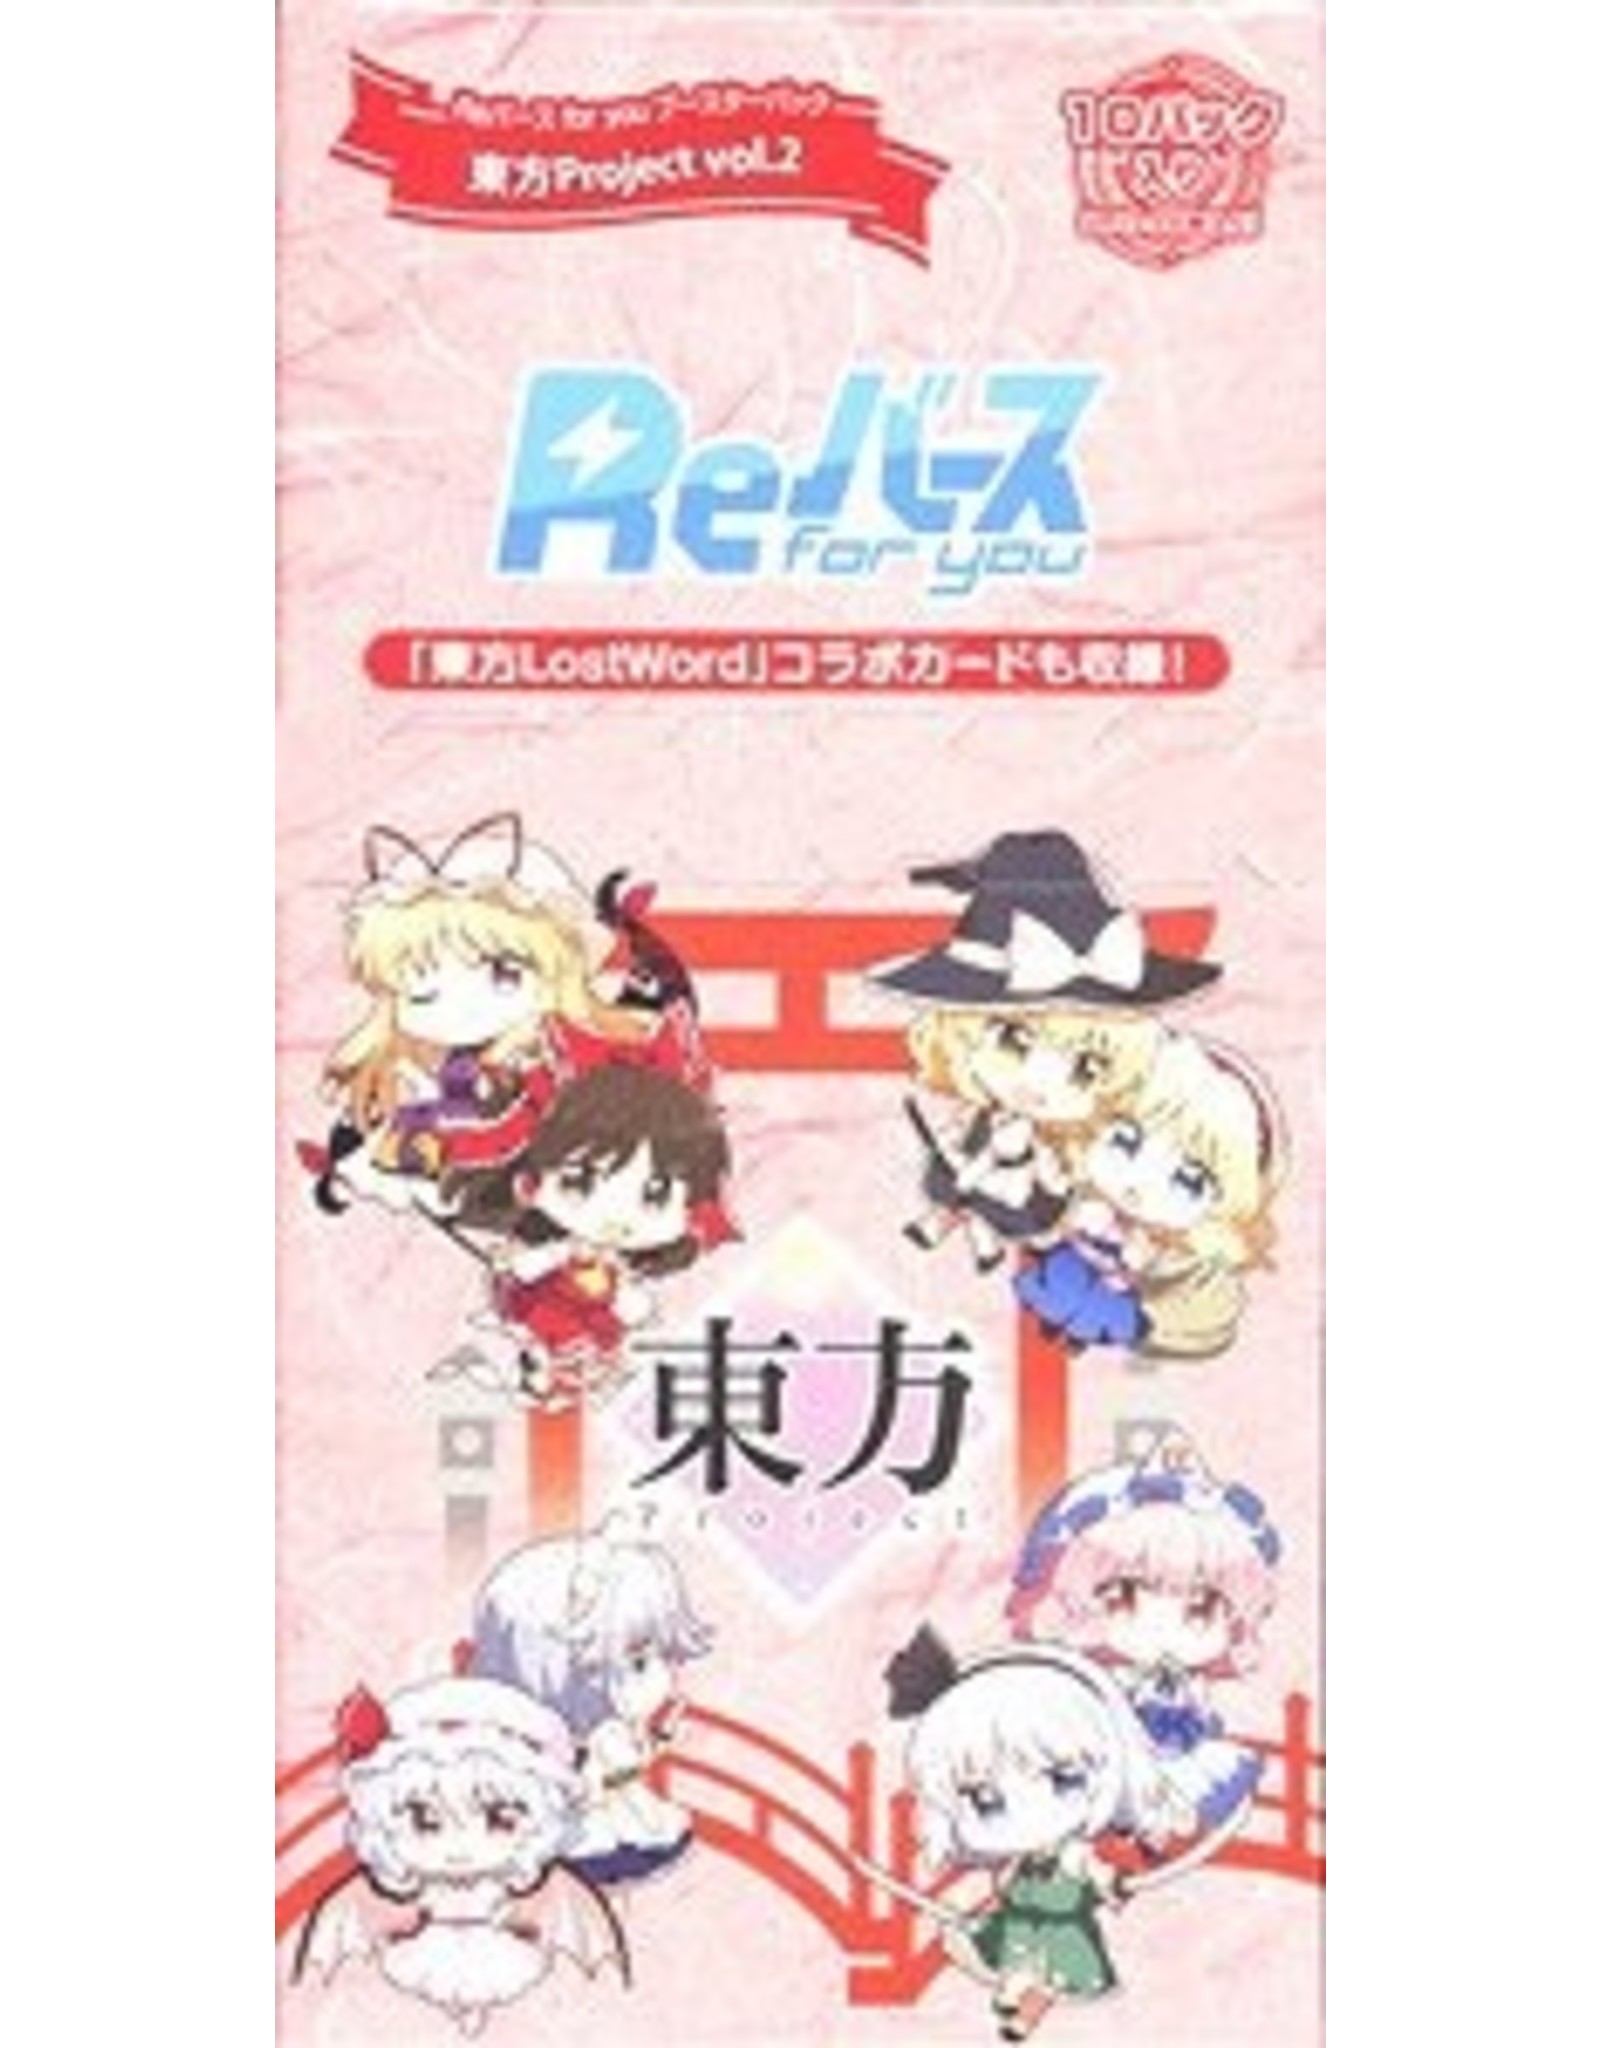 Rebirth for You Touhou vol. 2 Booster Box